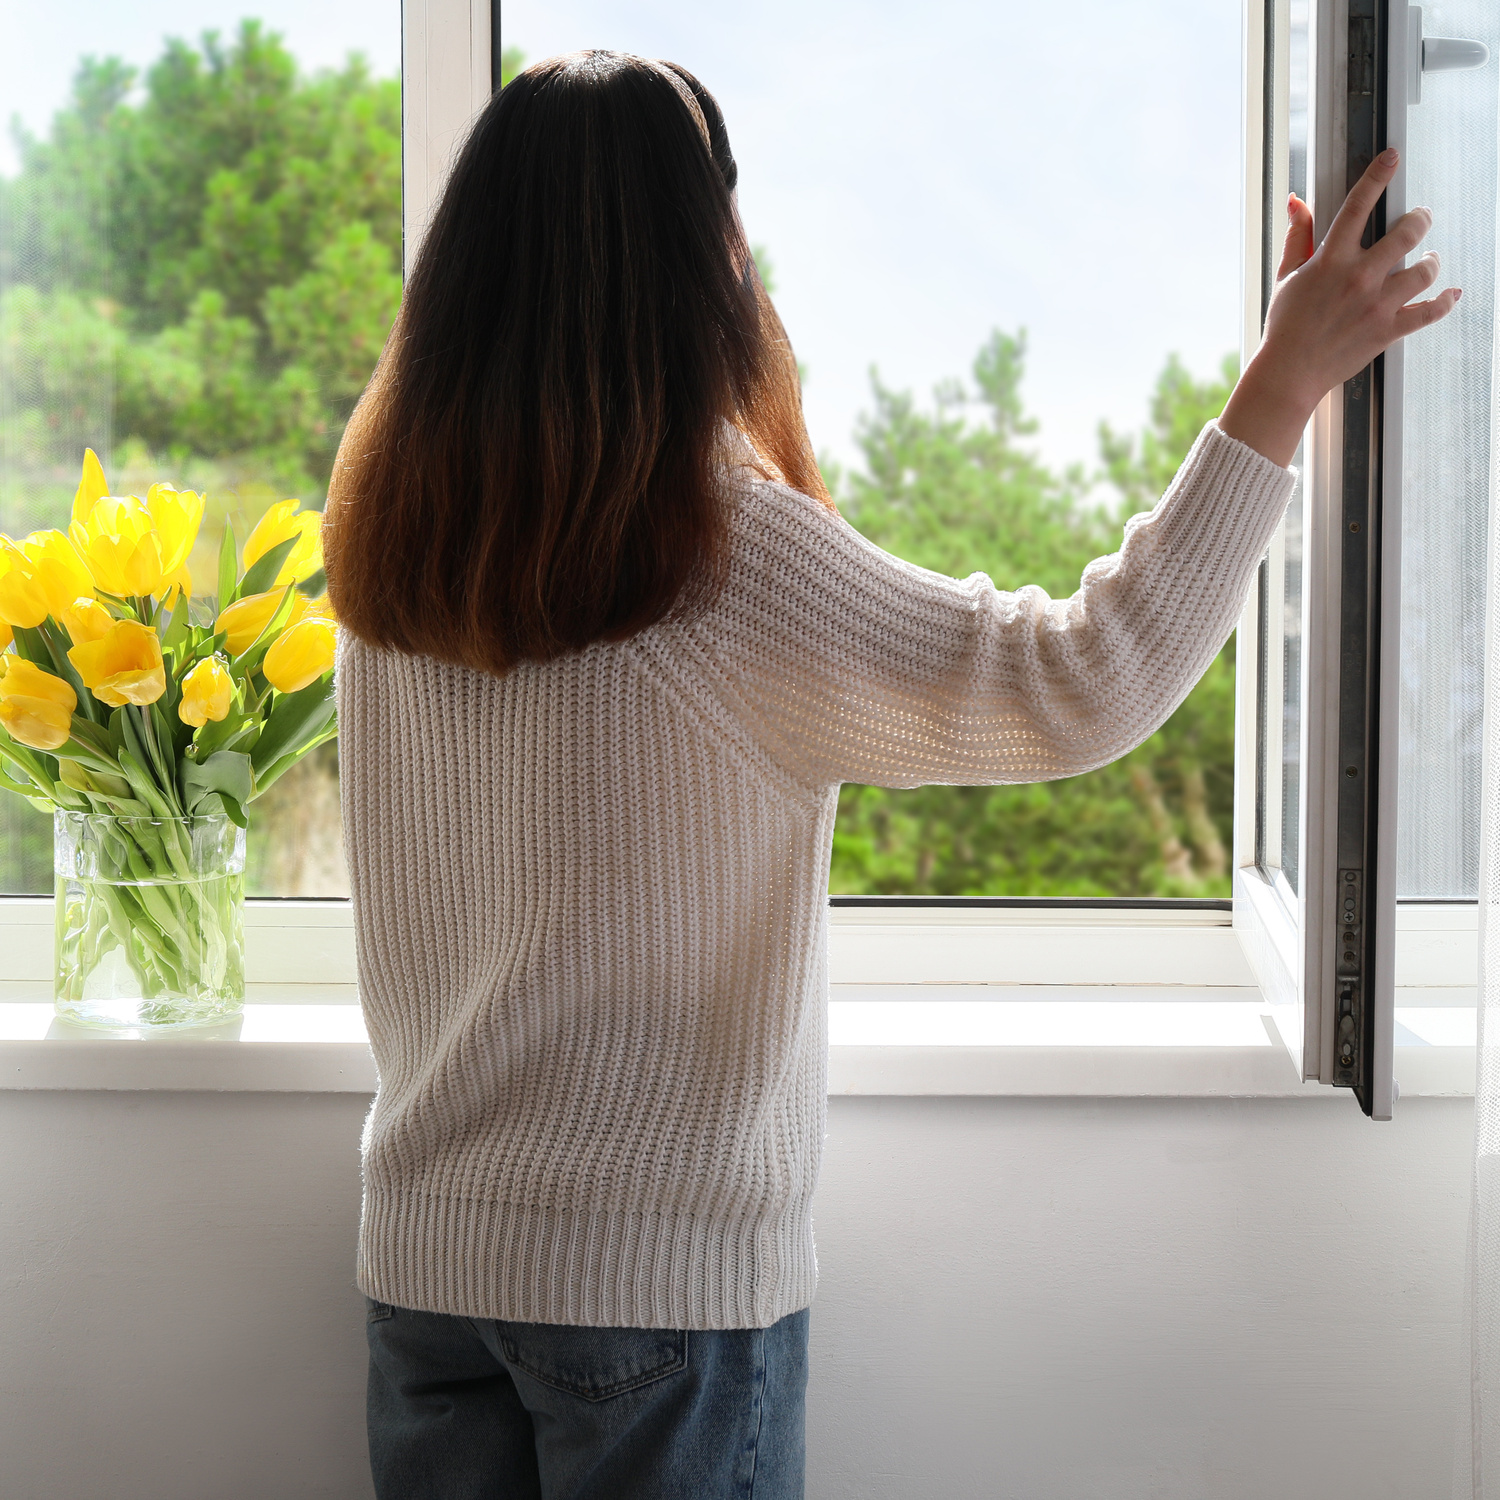 A young woman with her back to the camera, opening a window in her home and staring at the trees outside.